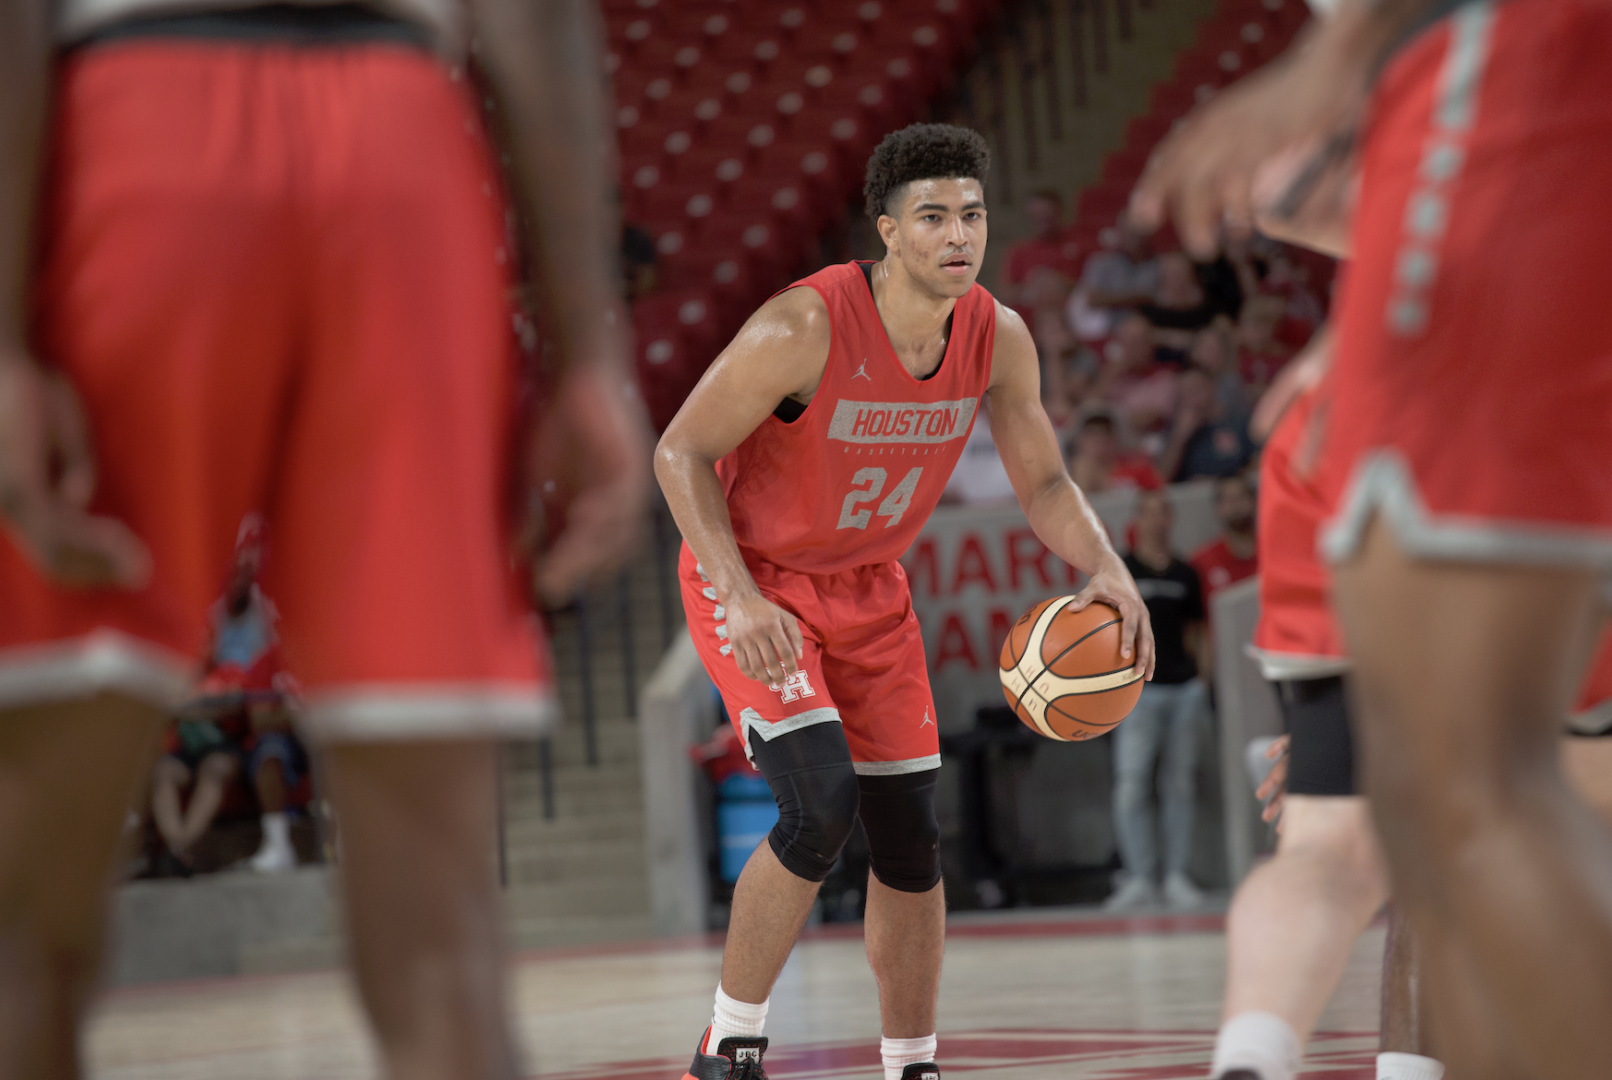 Sophomore guard Quentin Grimes is back to school in his first semester at Houston after transferring from Kansas in the summer. | Trevor Nolley/The Cougar